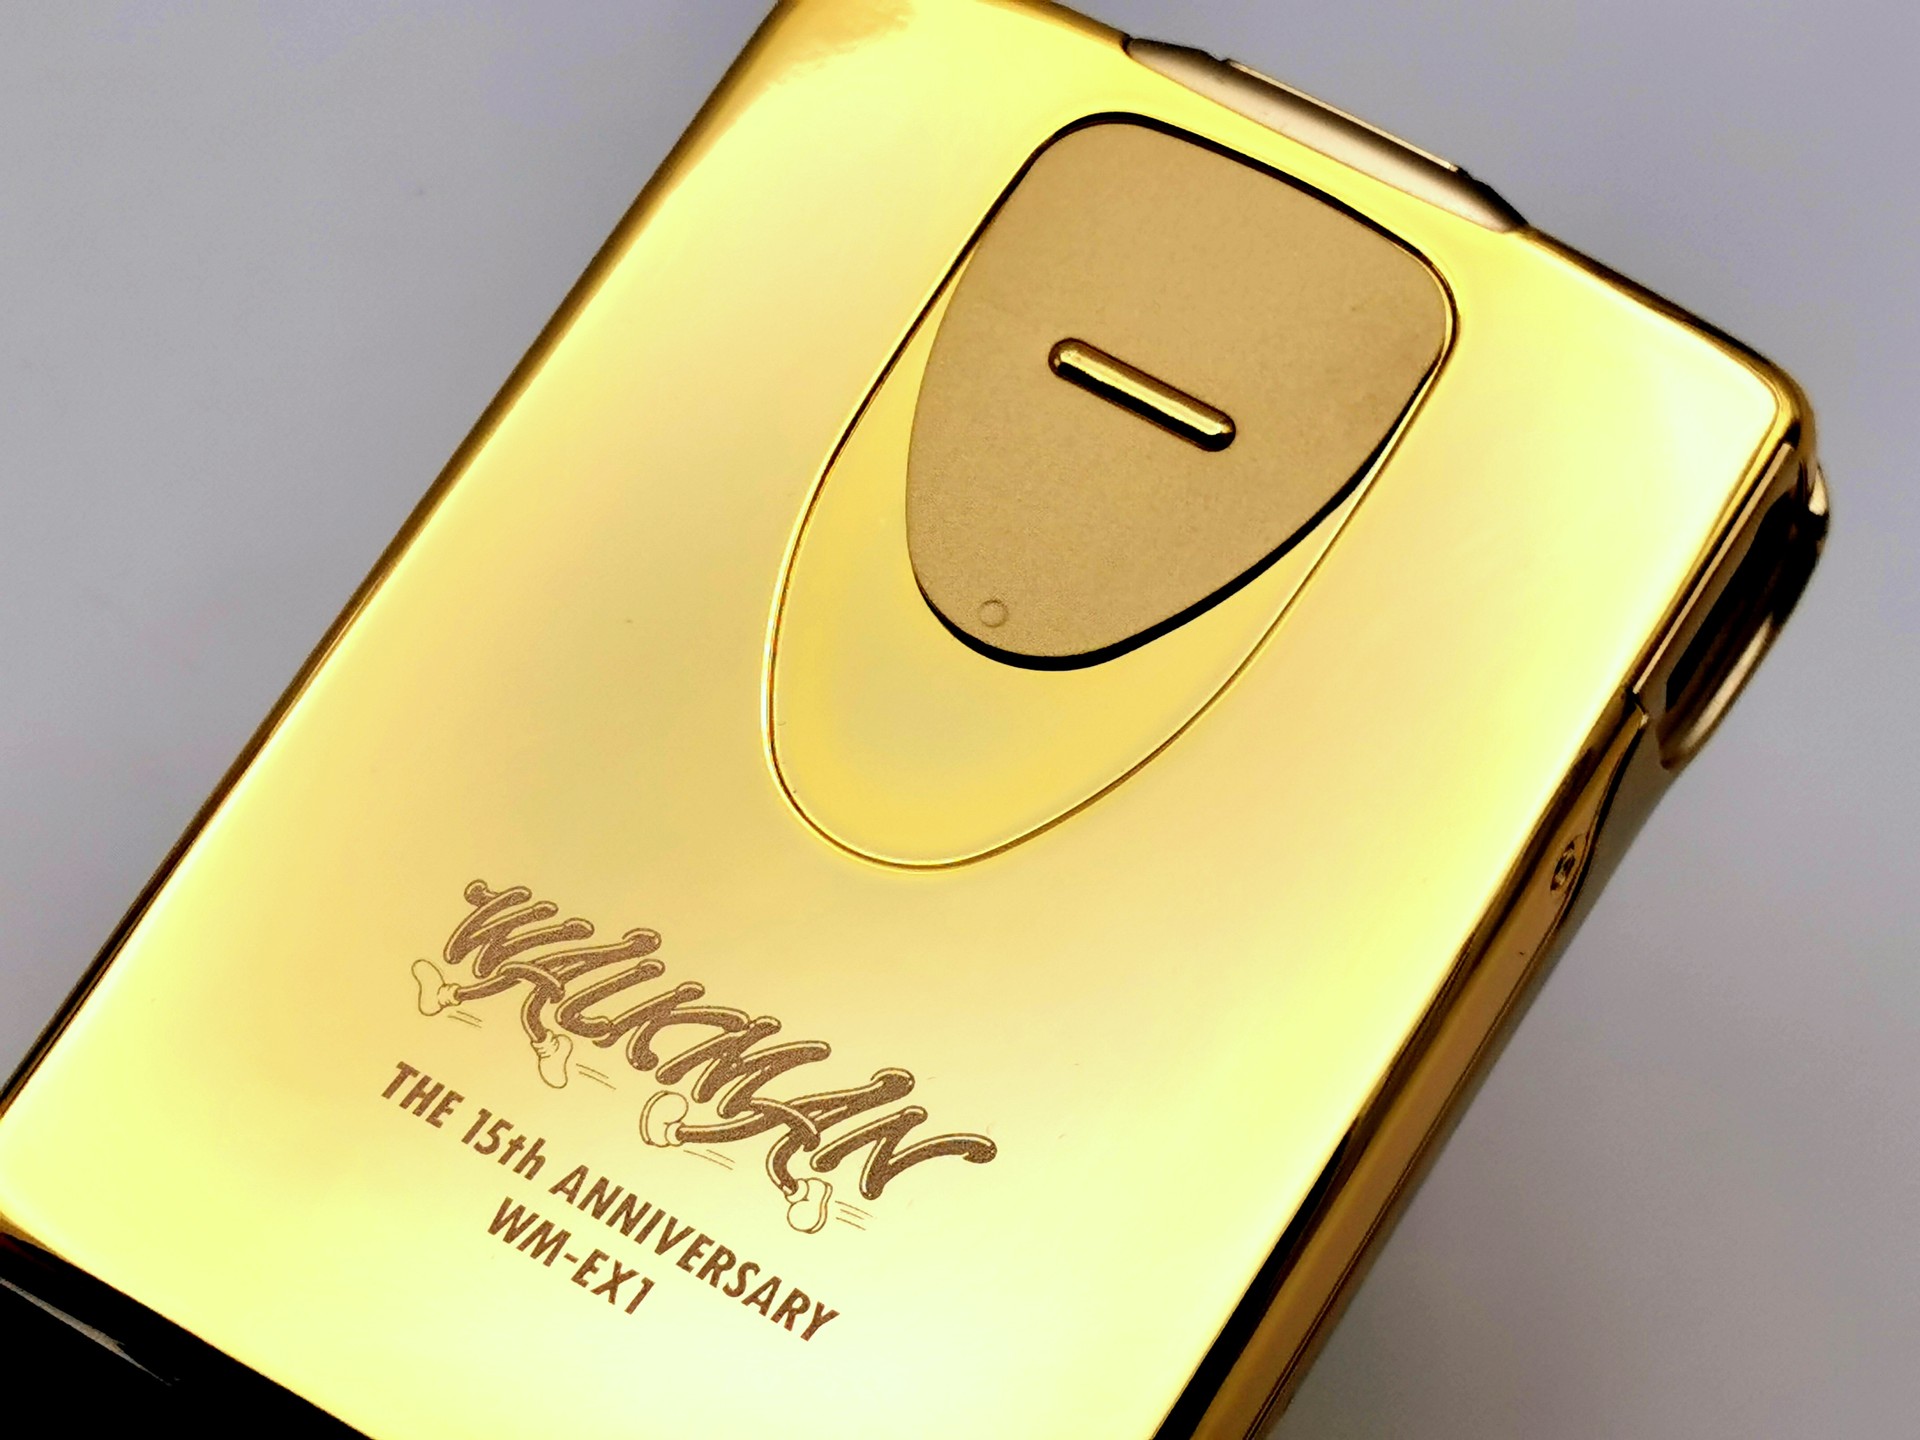 Sony_WM-EX1HG_-_Gold_angled_with_commemorative_text_g-boxedwalkman